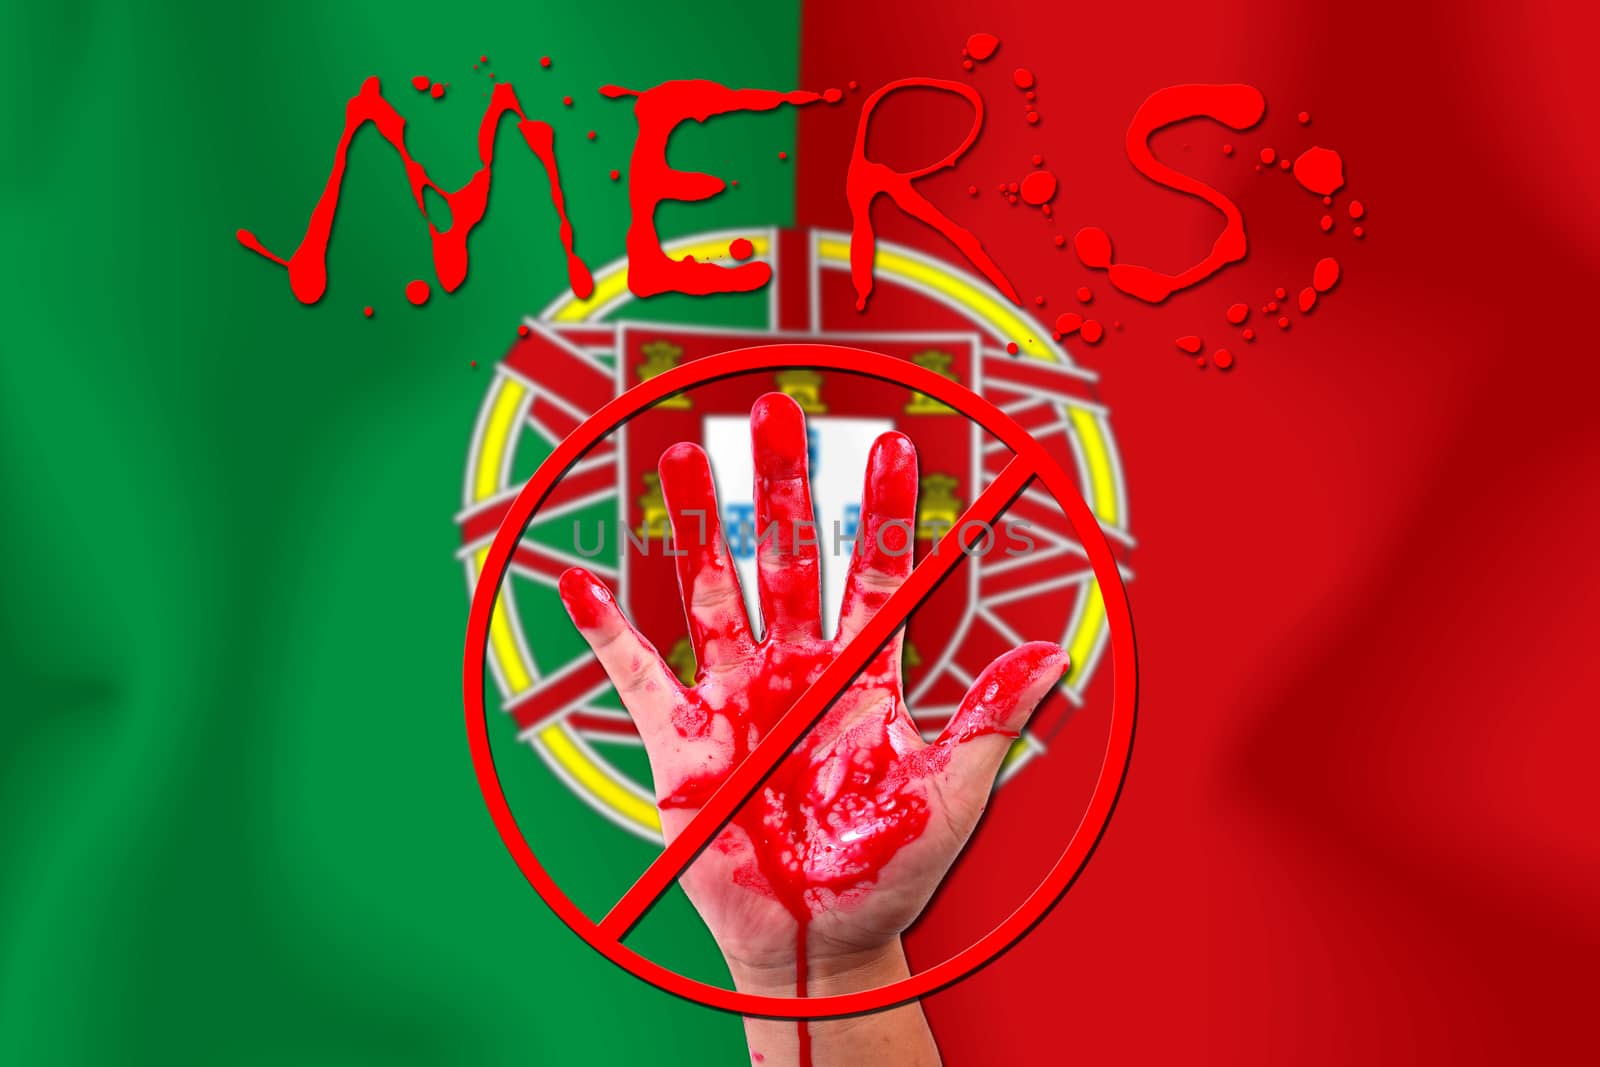 Concept show hand stop MERS Virus epidemic  portuguese flag background.